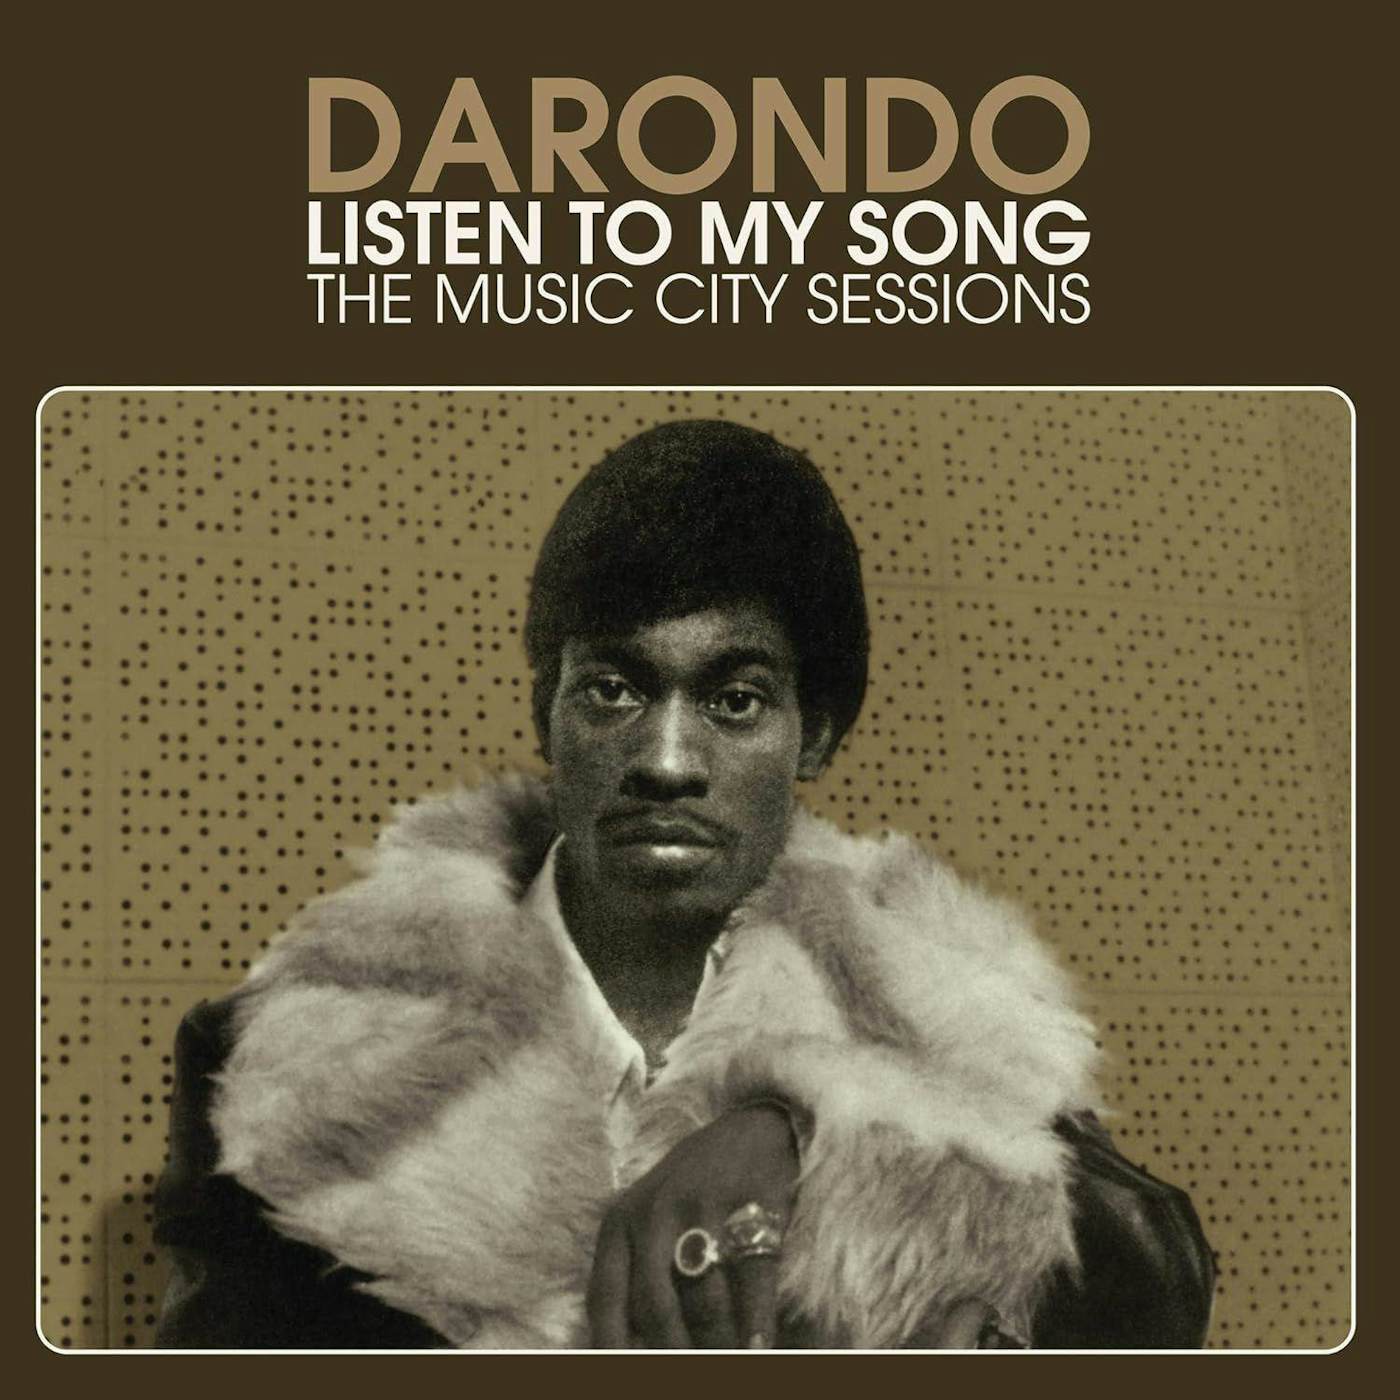 Darondo Listen To My Song: The Music City Sessions Vinyl Record